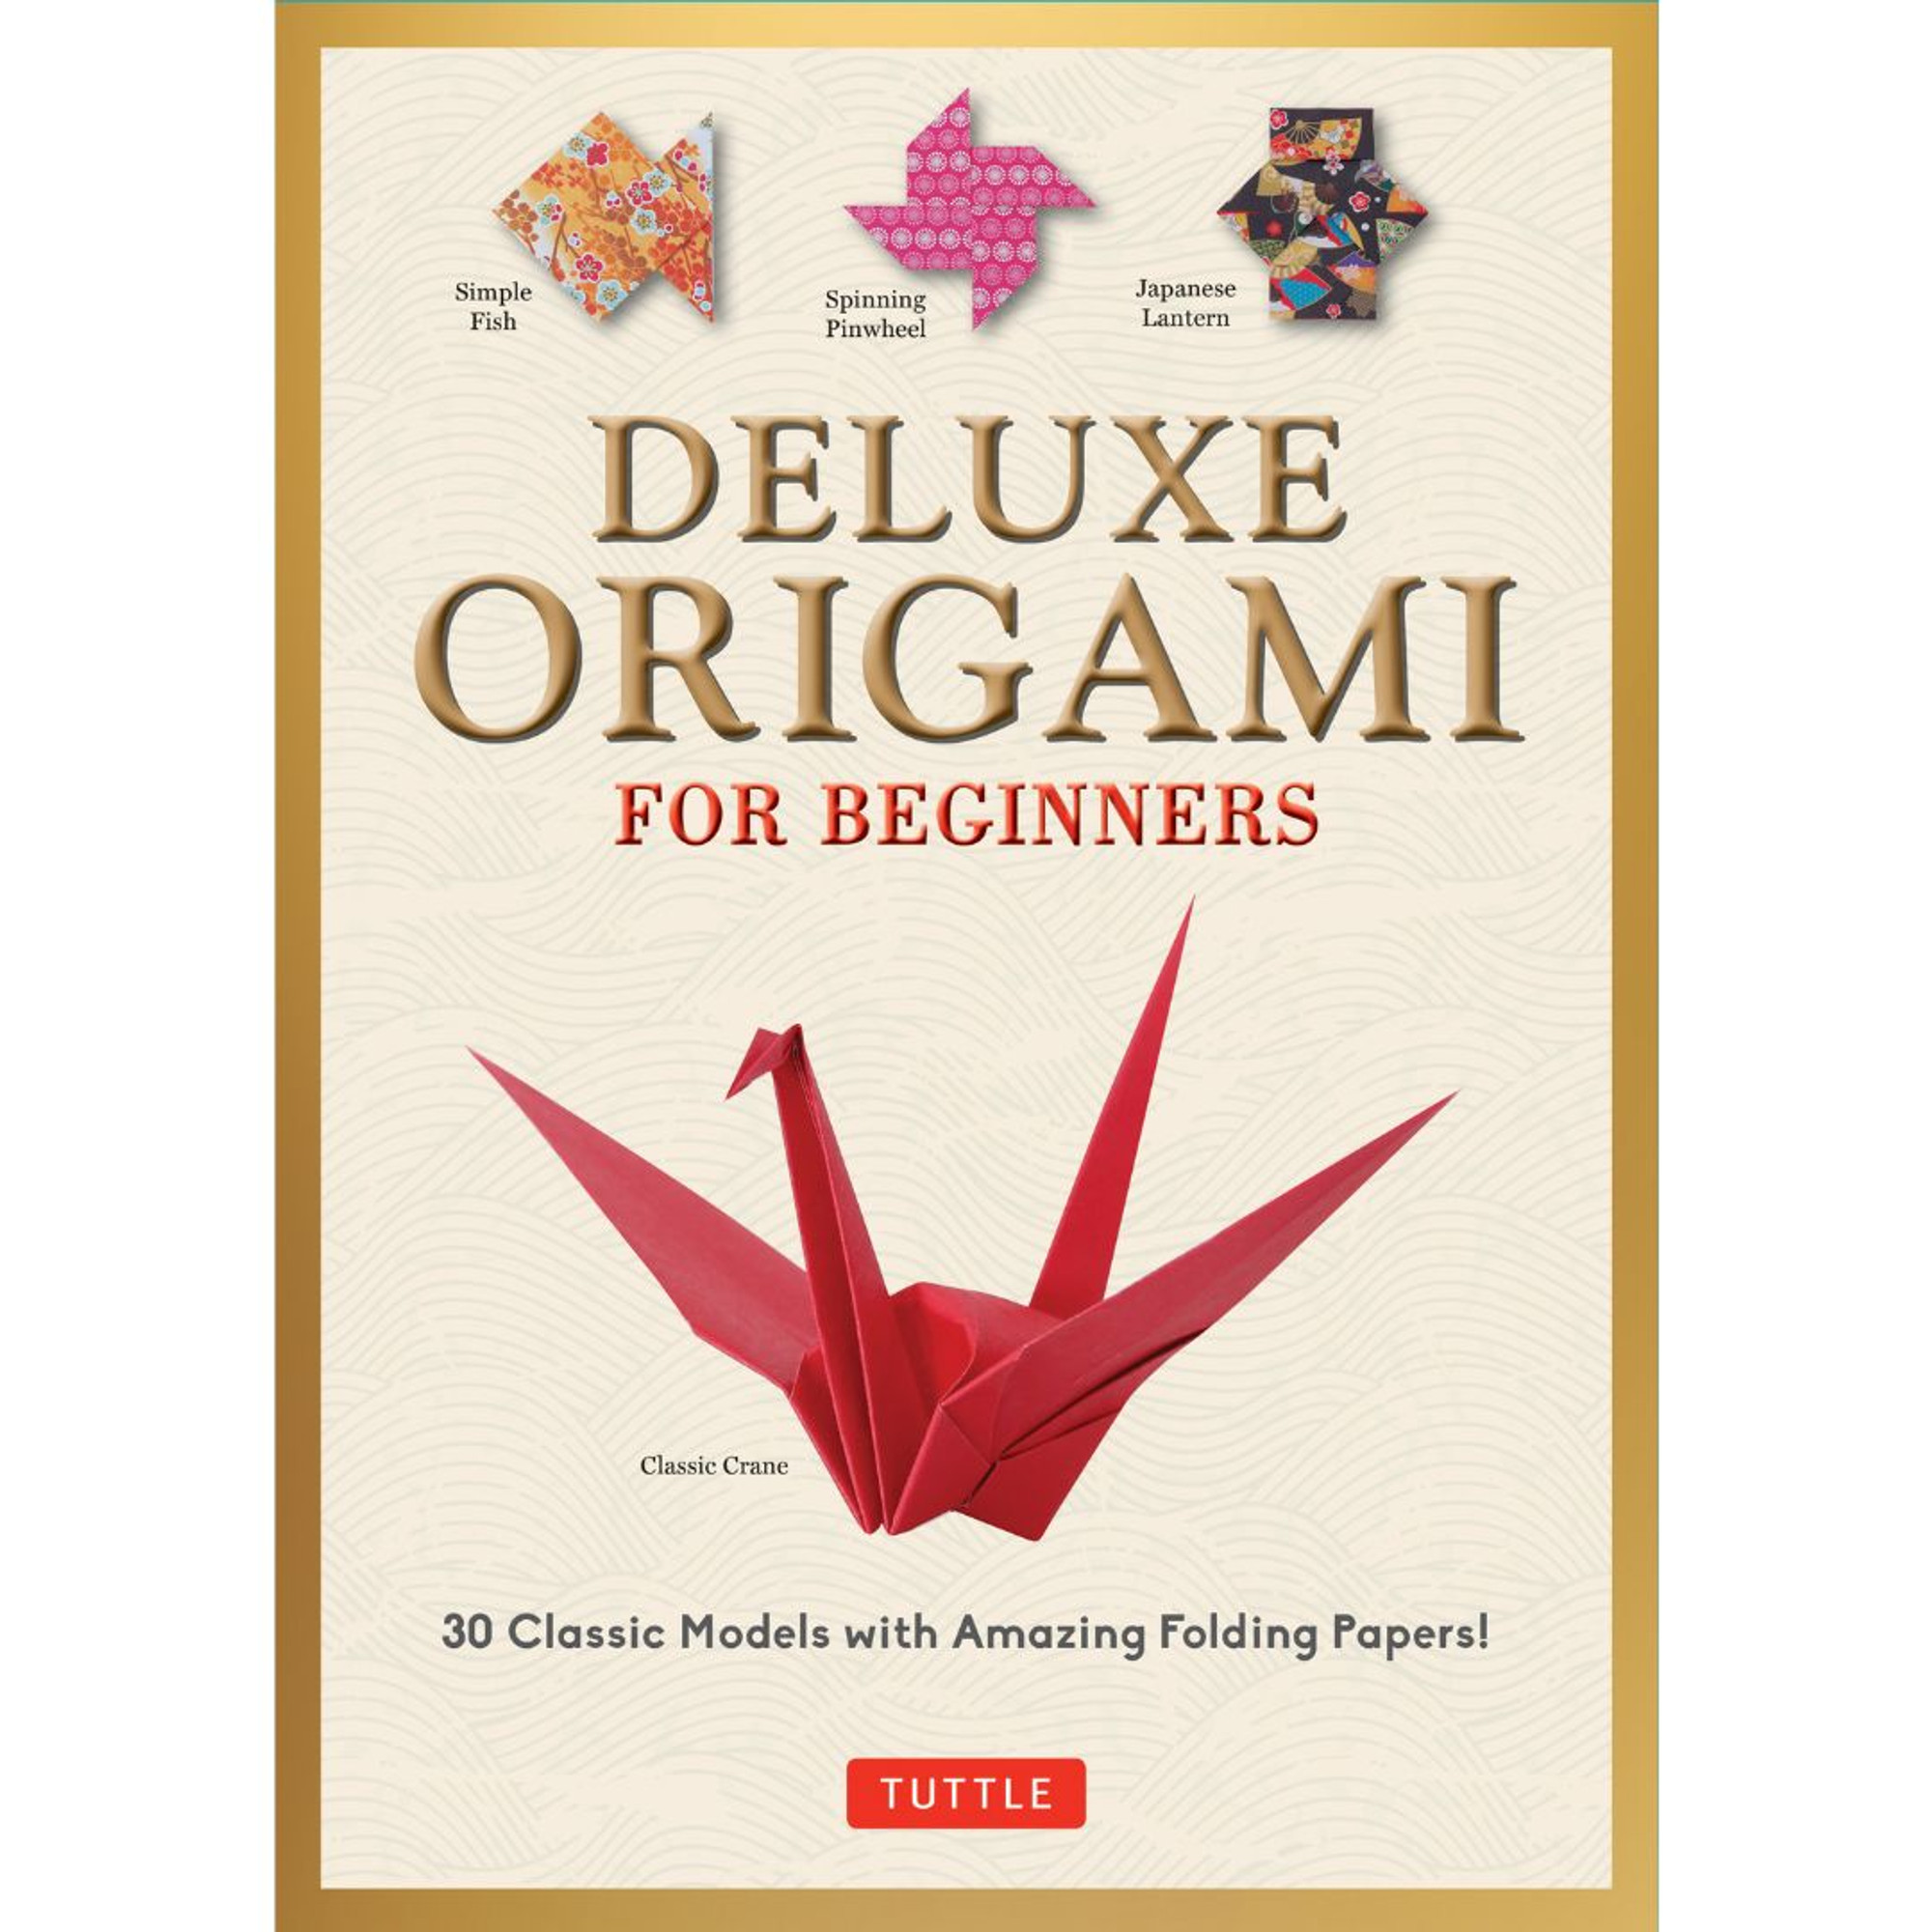 Ultimate Origami for Beginners Kit: The Perfect Kit for Beginners-Everything You Need is in This Box!: Kit Includes Origami Book, 19 Projects, 62 Origami Papers & DVD [Book]